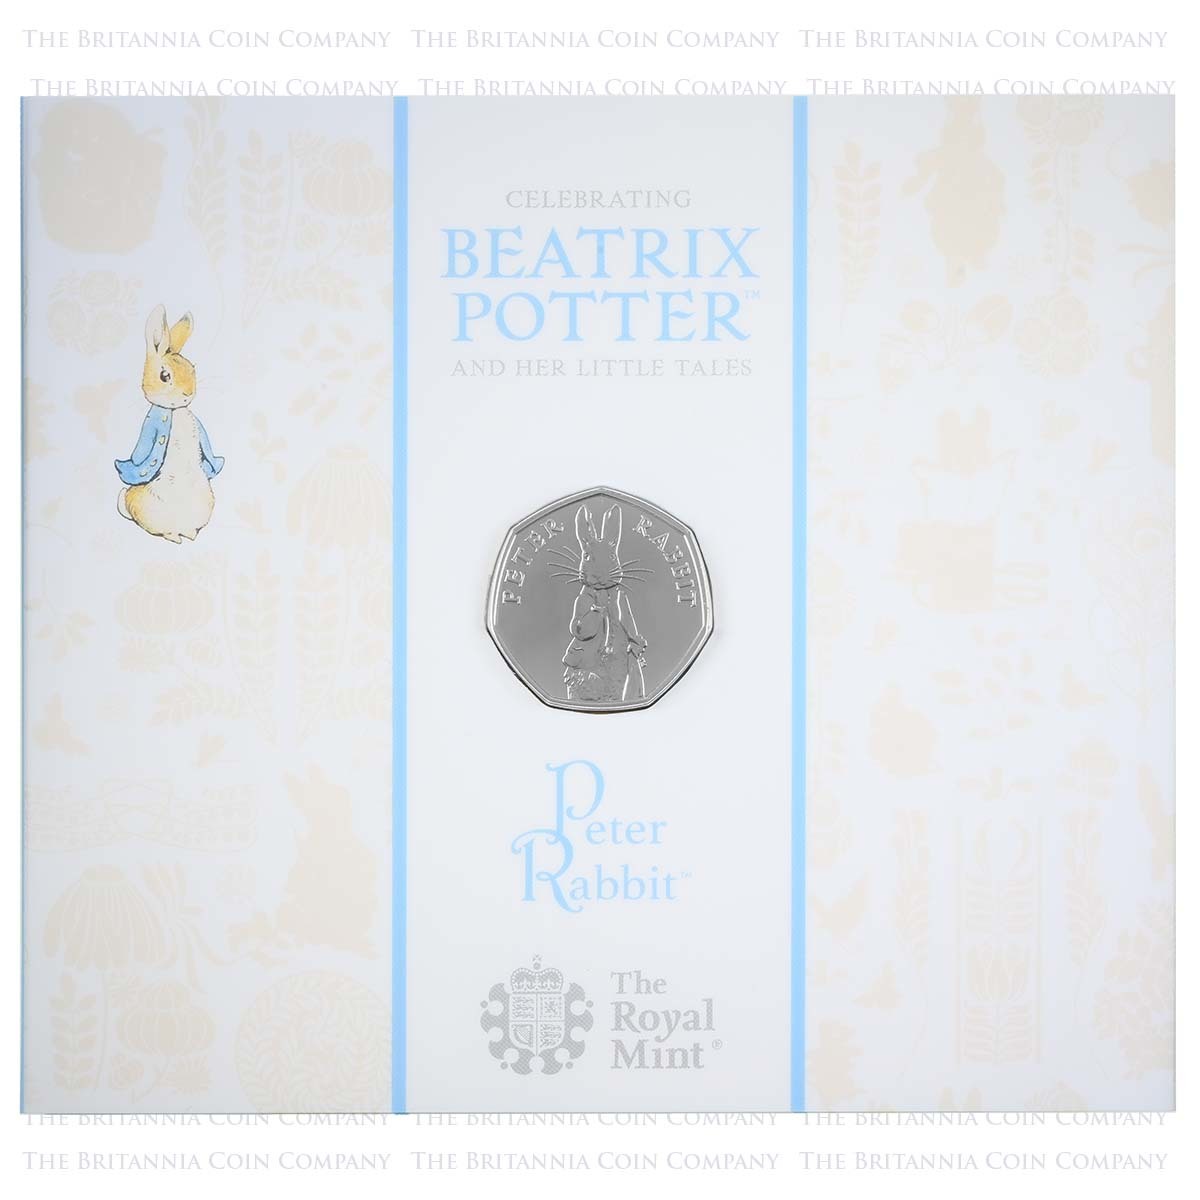 UK19PRBU 2019 Beatrix Potter Peter Rabbit Fifty Pence Brilliant Uncirculated Coin In Folder Packaging